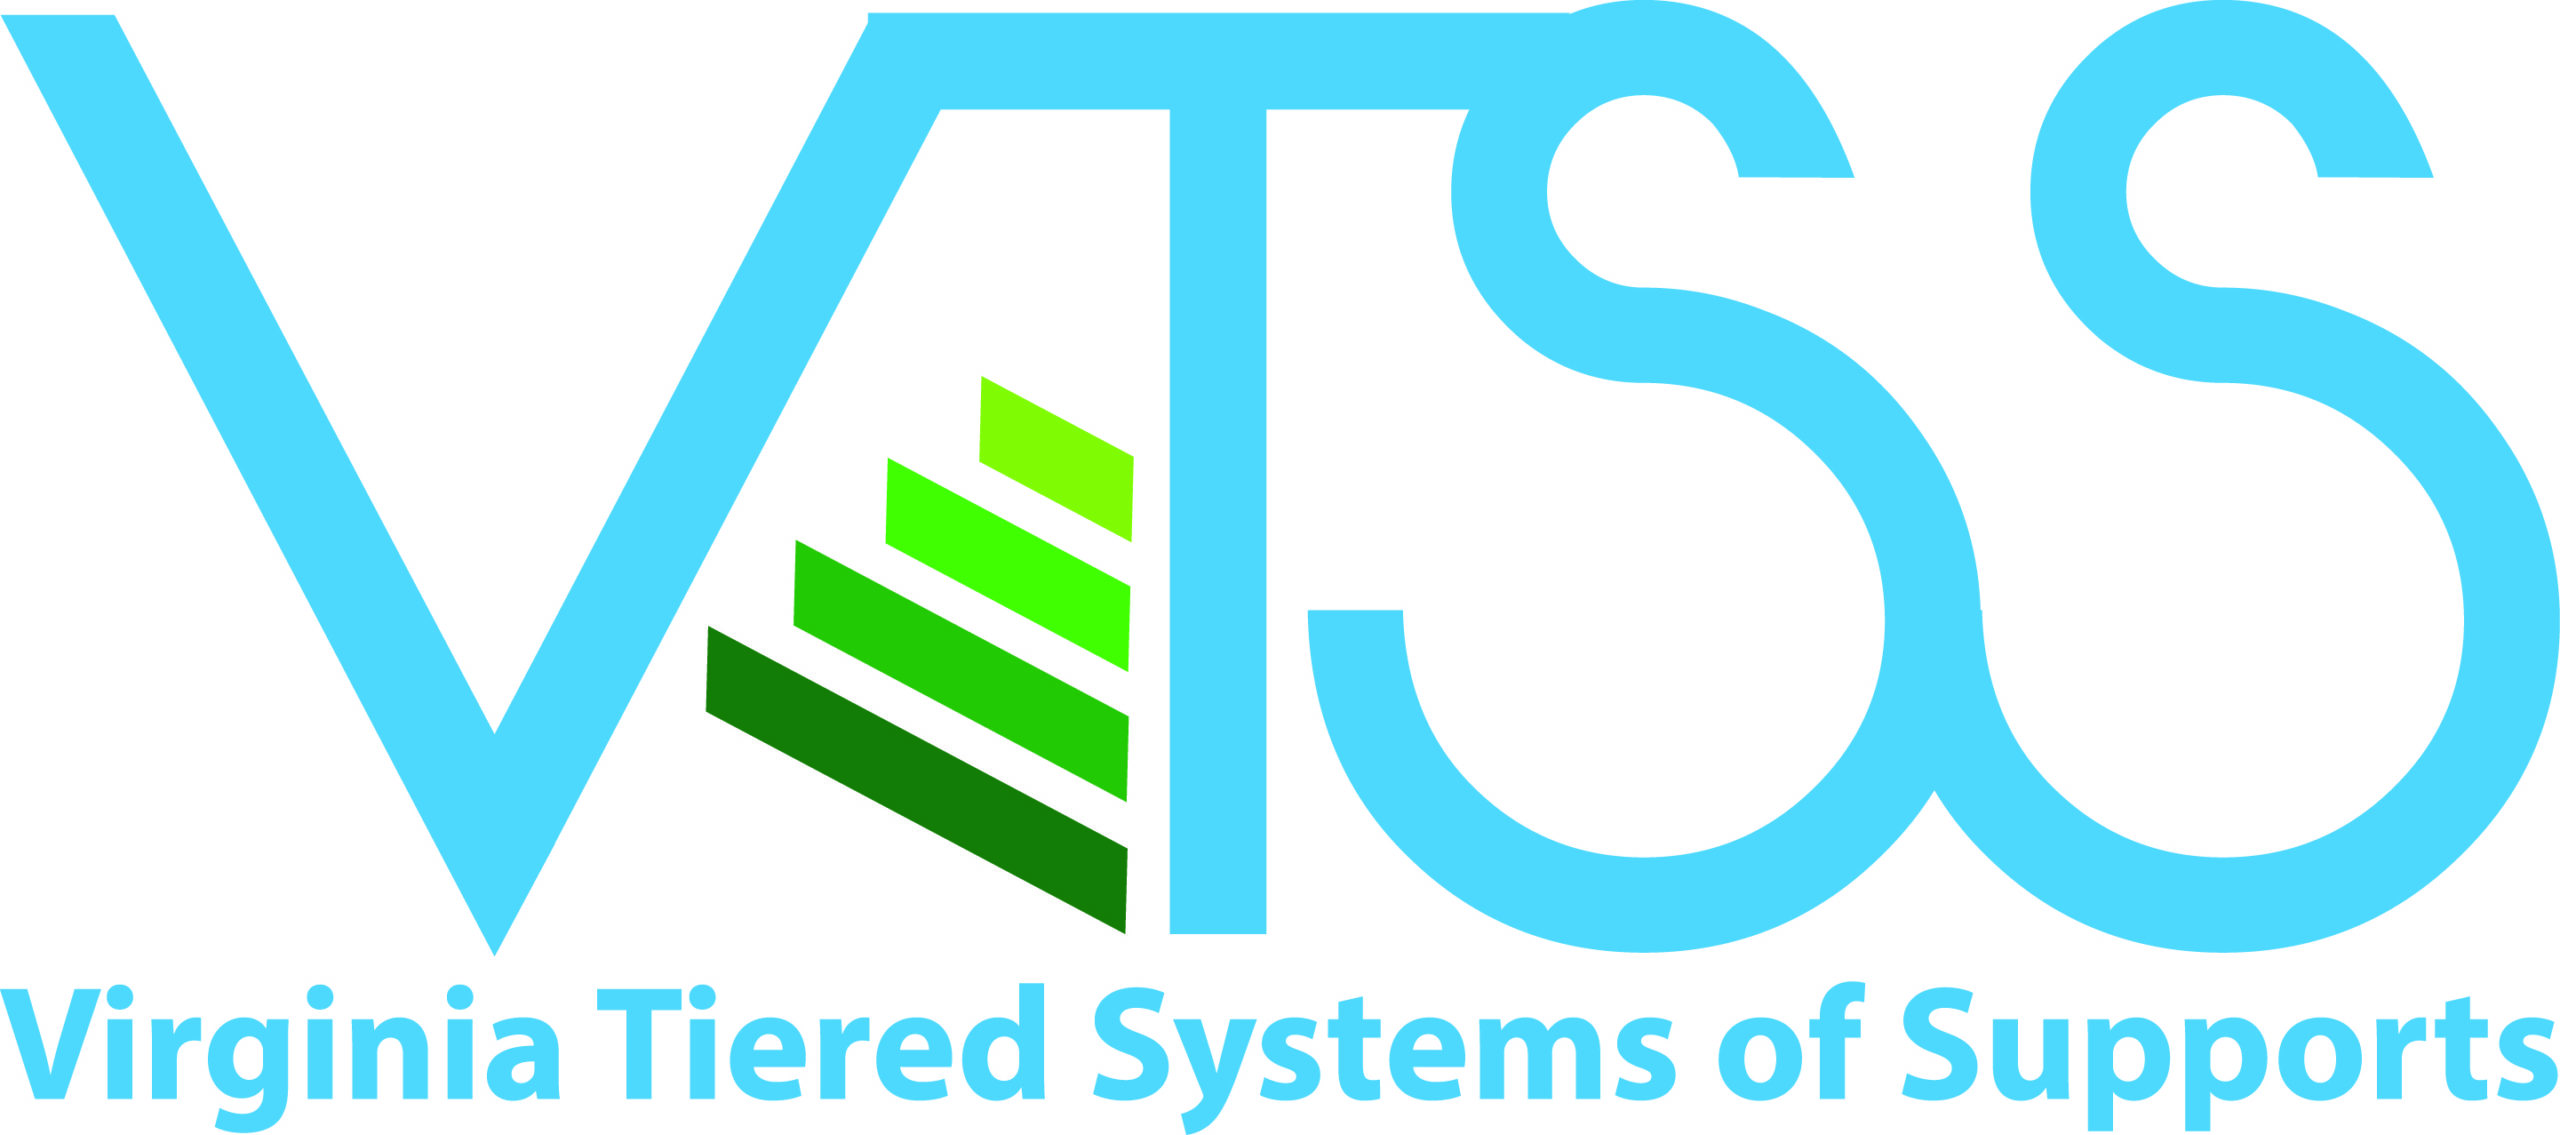 Virginia Tiered Systems of Support logo